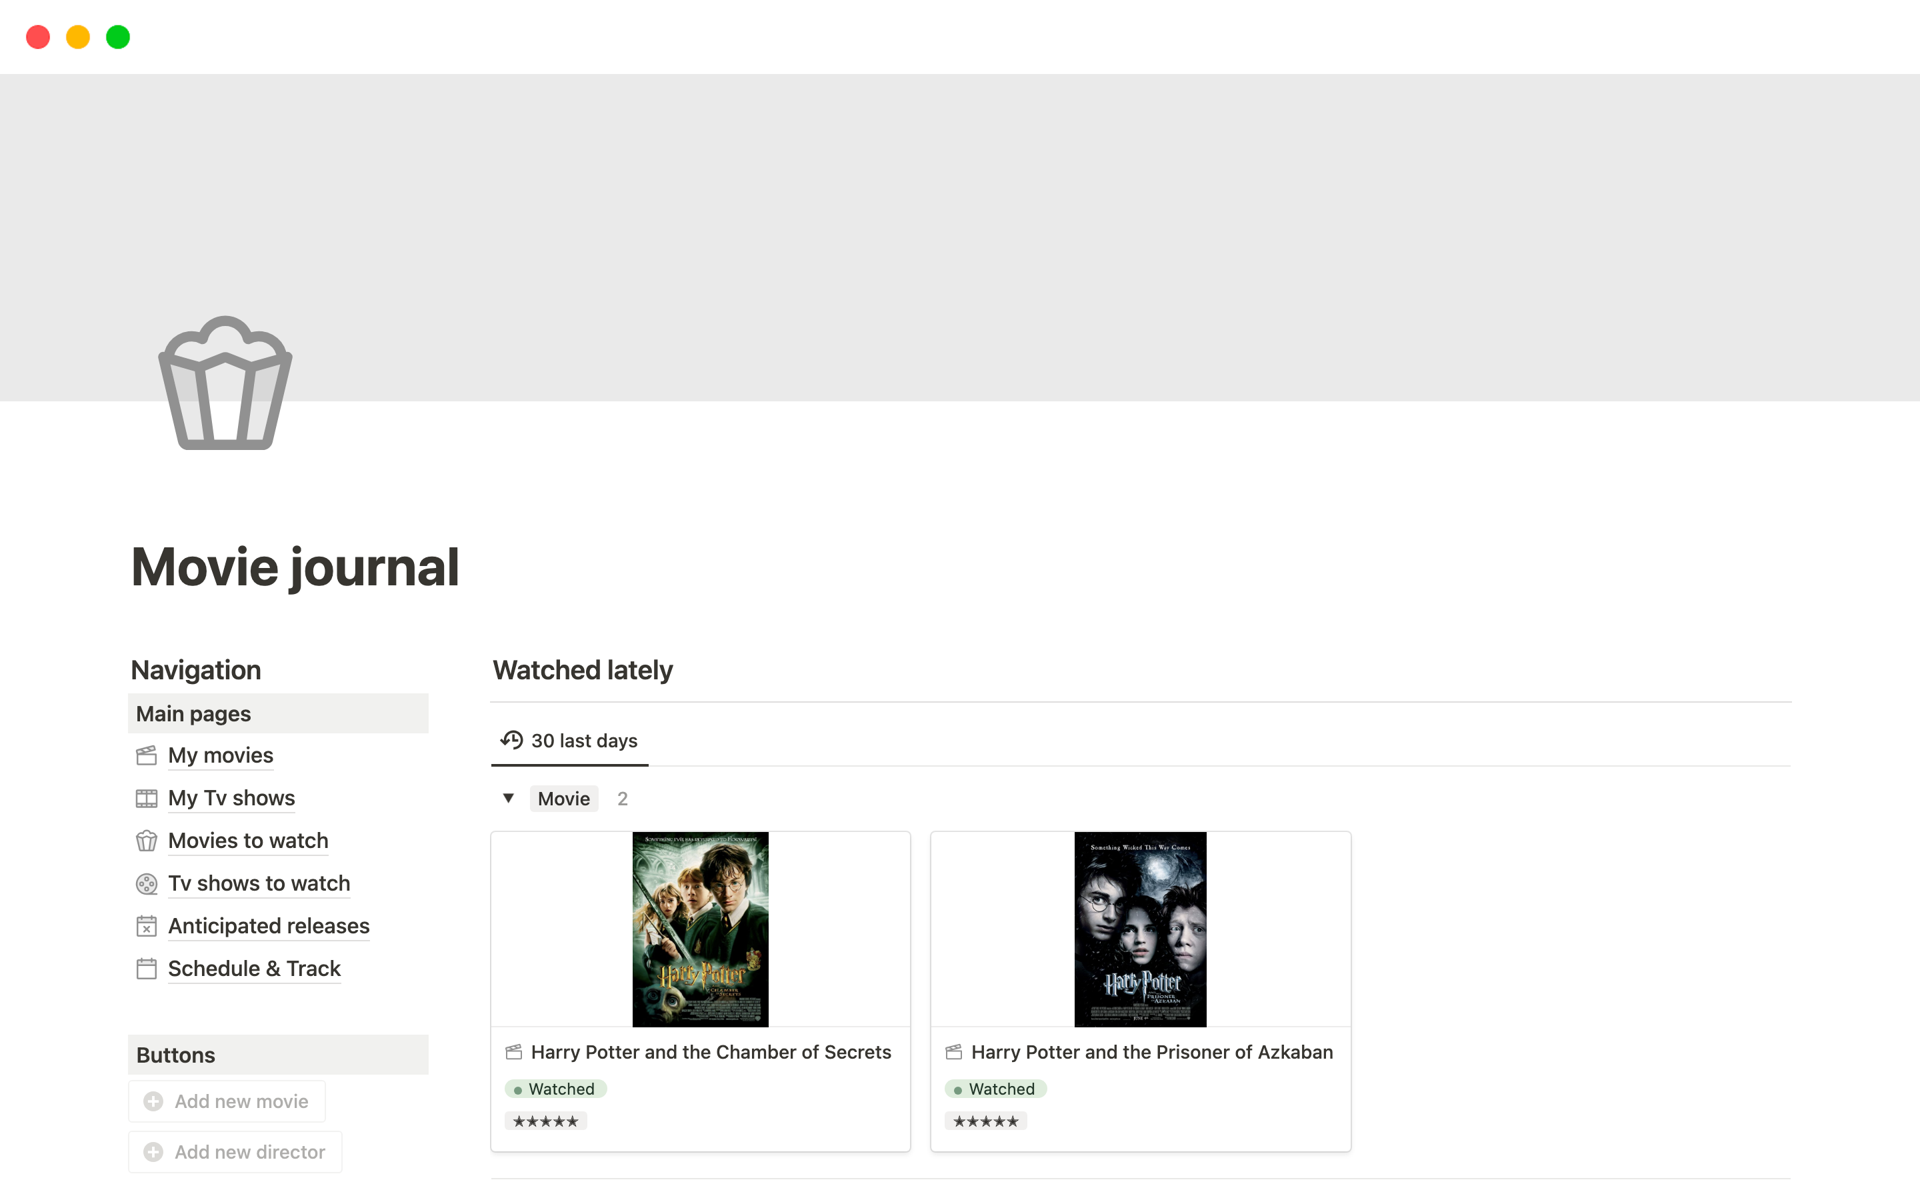 A journal to track, rate, and schedule your movie and TV shows.